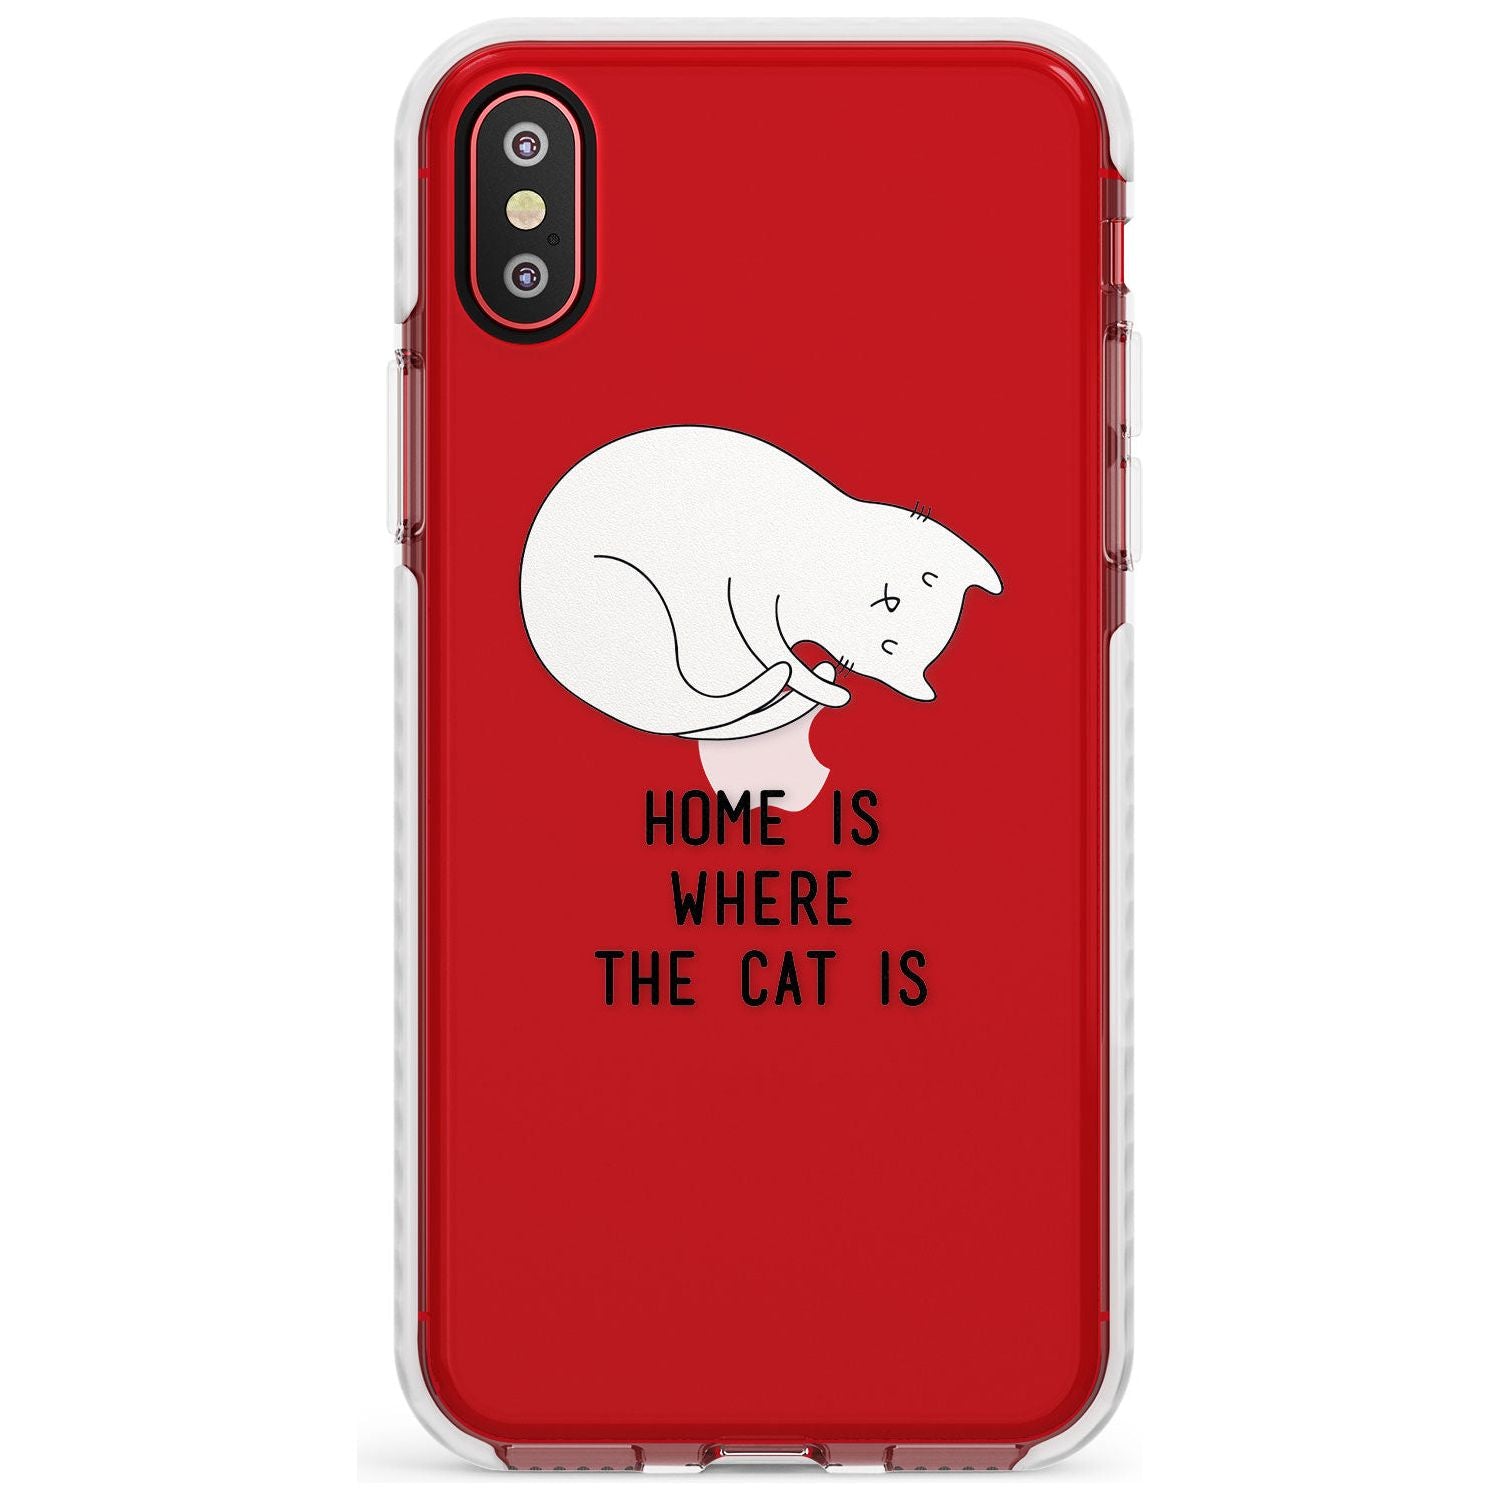 Home Is Where the Cat is Slim TPU Phone Case Warehouse X XS Max XR